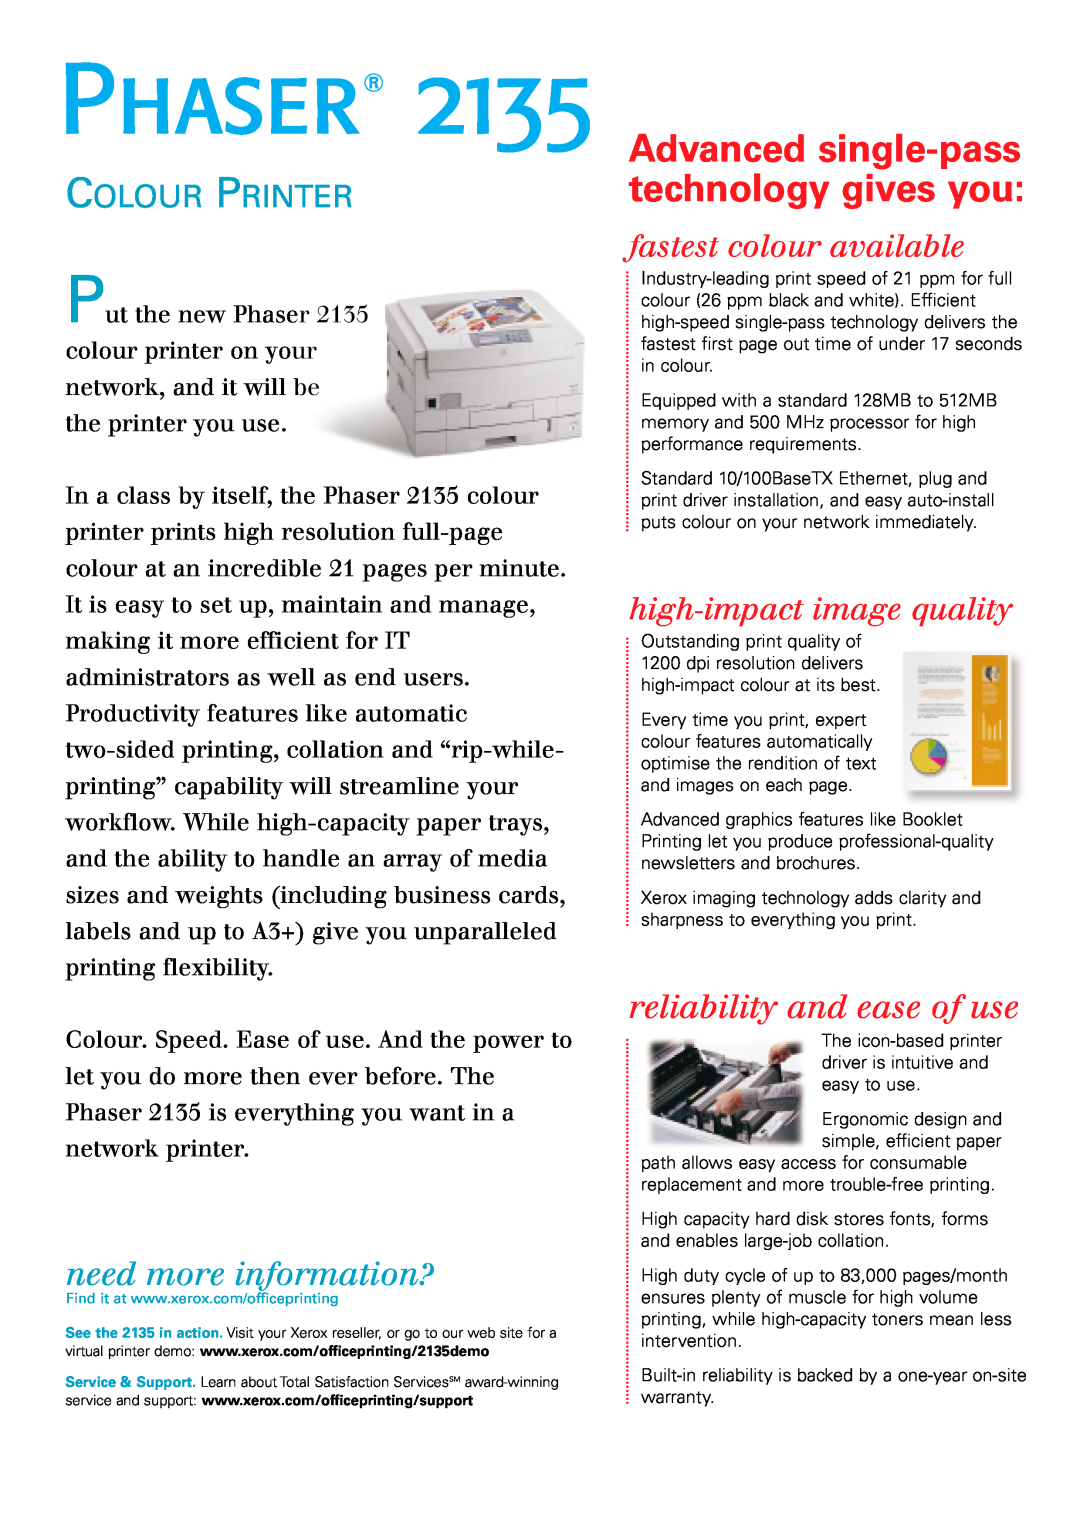 Xerox 2135N brochure fastest colour available, high-impact image quality, Advanced single-pass technology gives you 